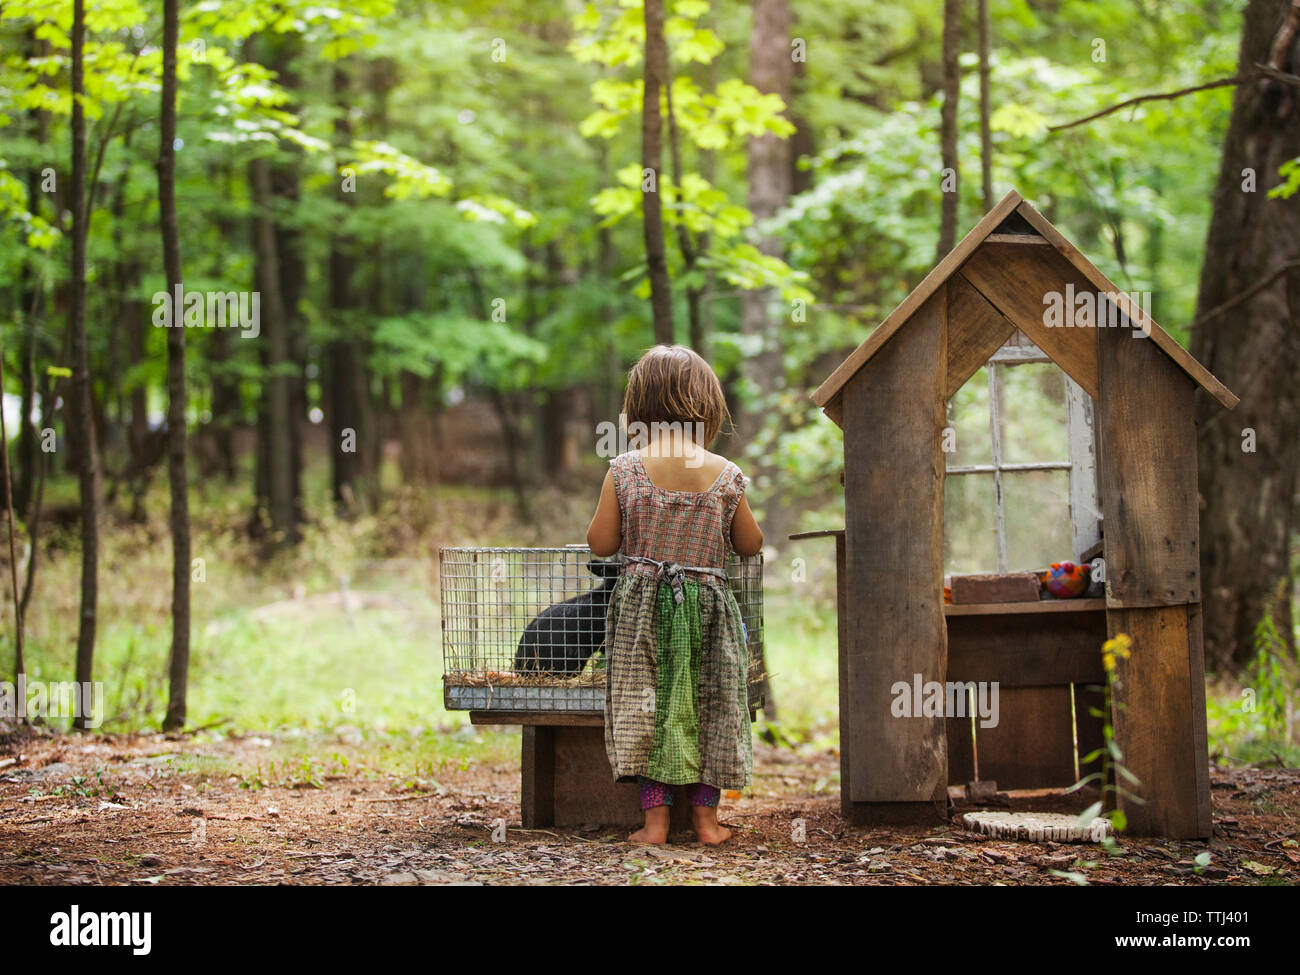 Rear view of girl standing by rabbit hutch in forest Stock Photo